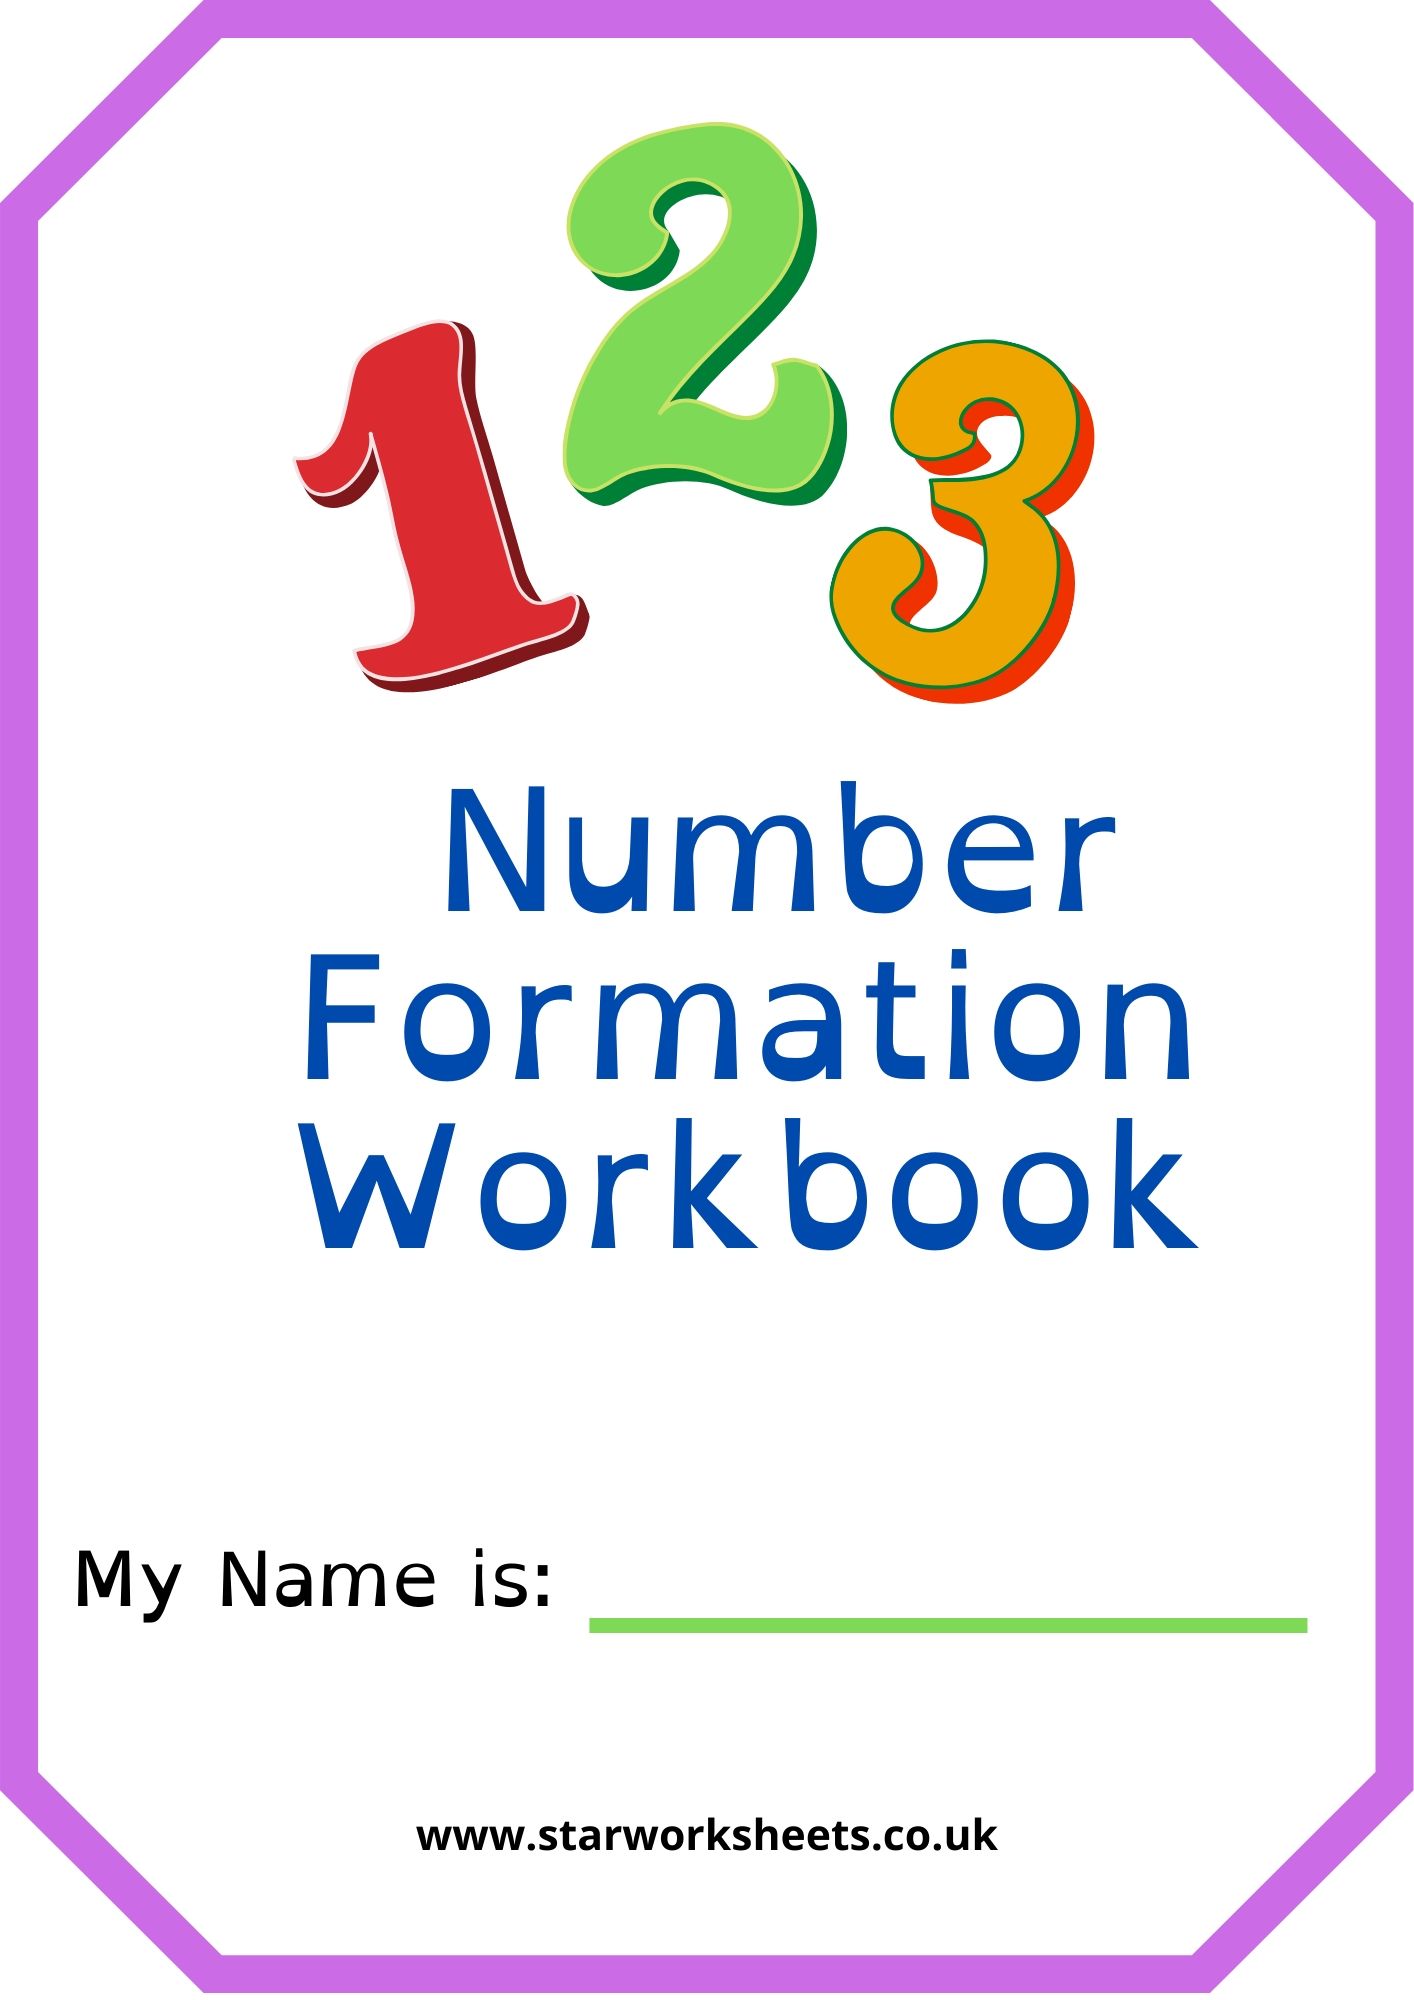 Number-Formation-Workbook with open Dyslexic